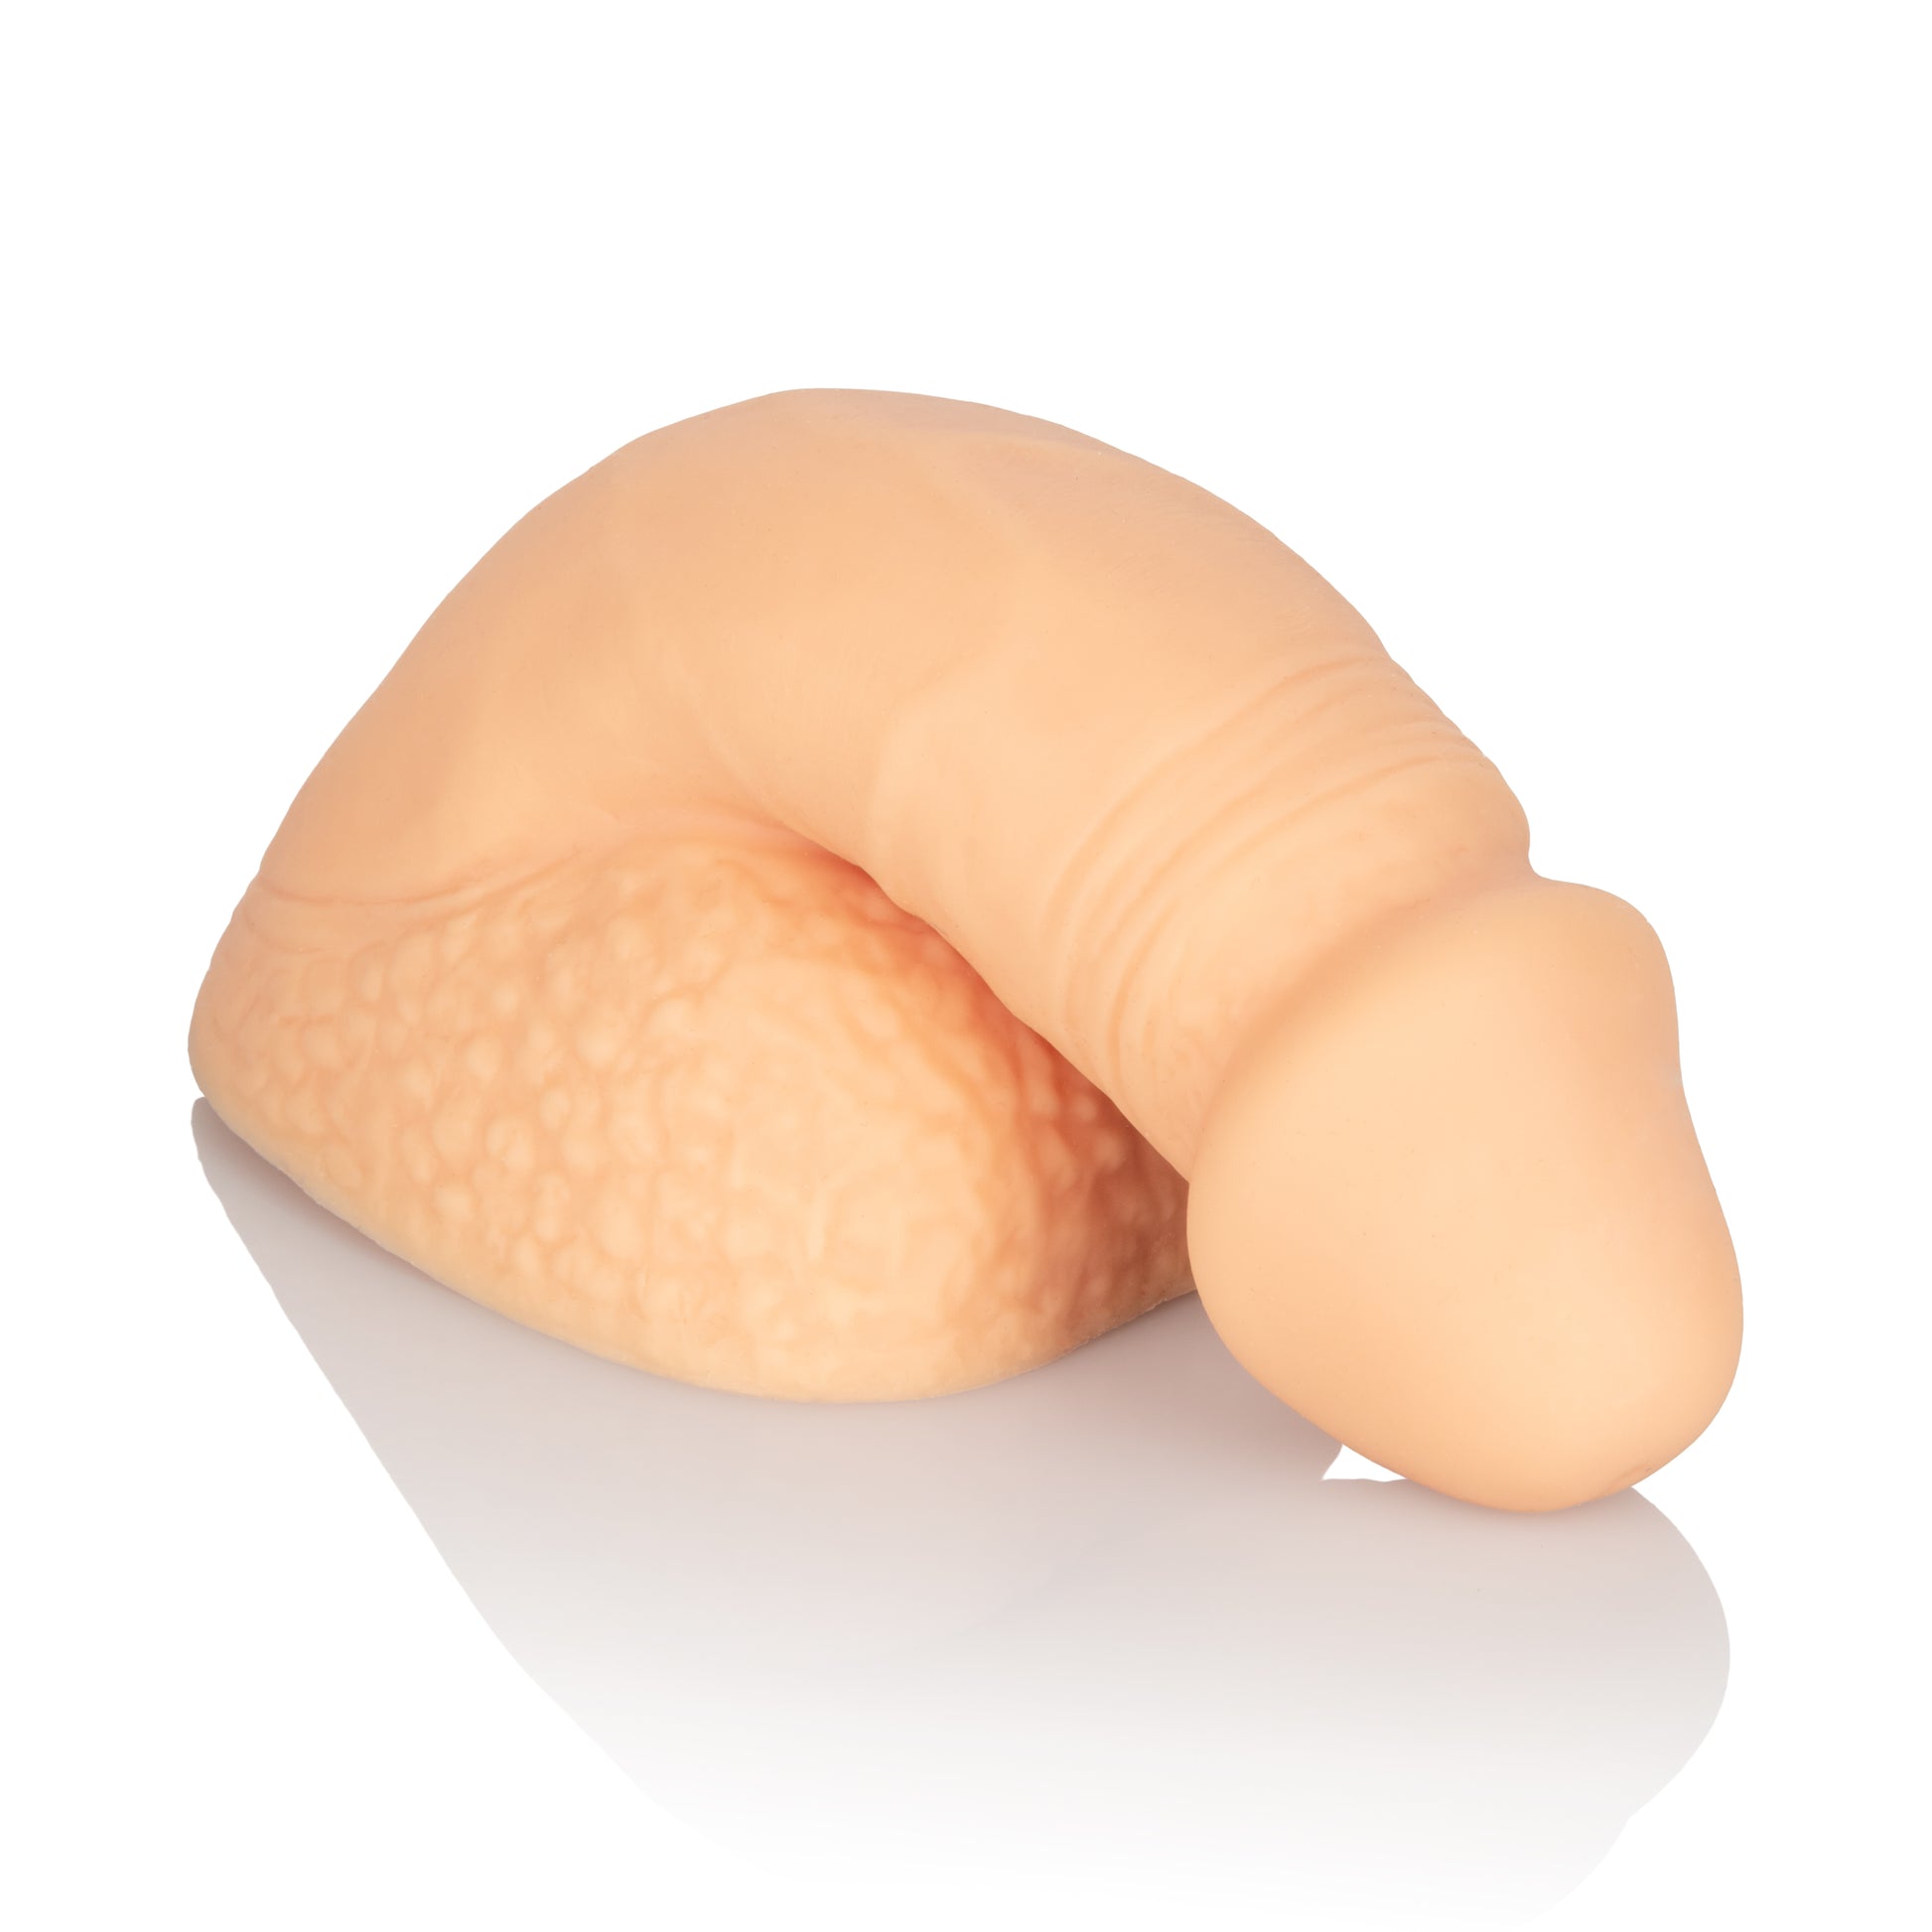 Packer Gear 4" Silicone Packing Penis - Ivory SE1580203